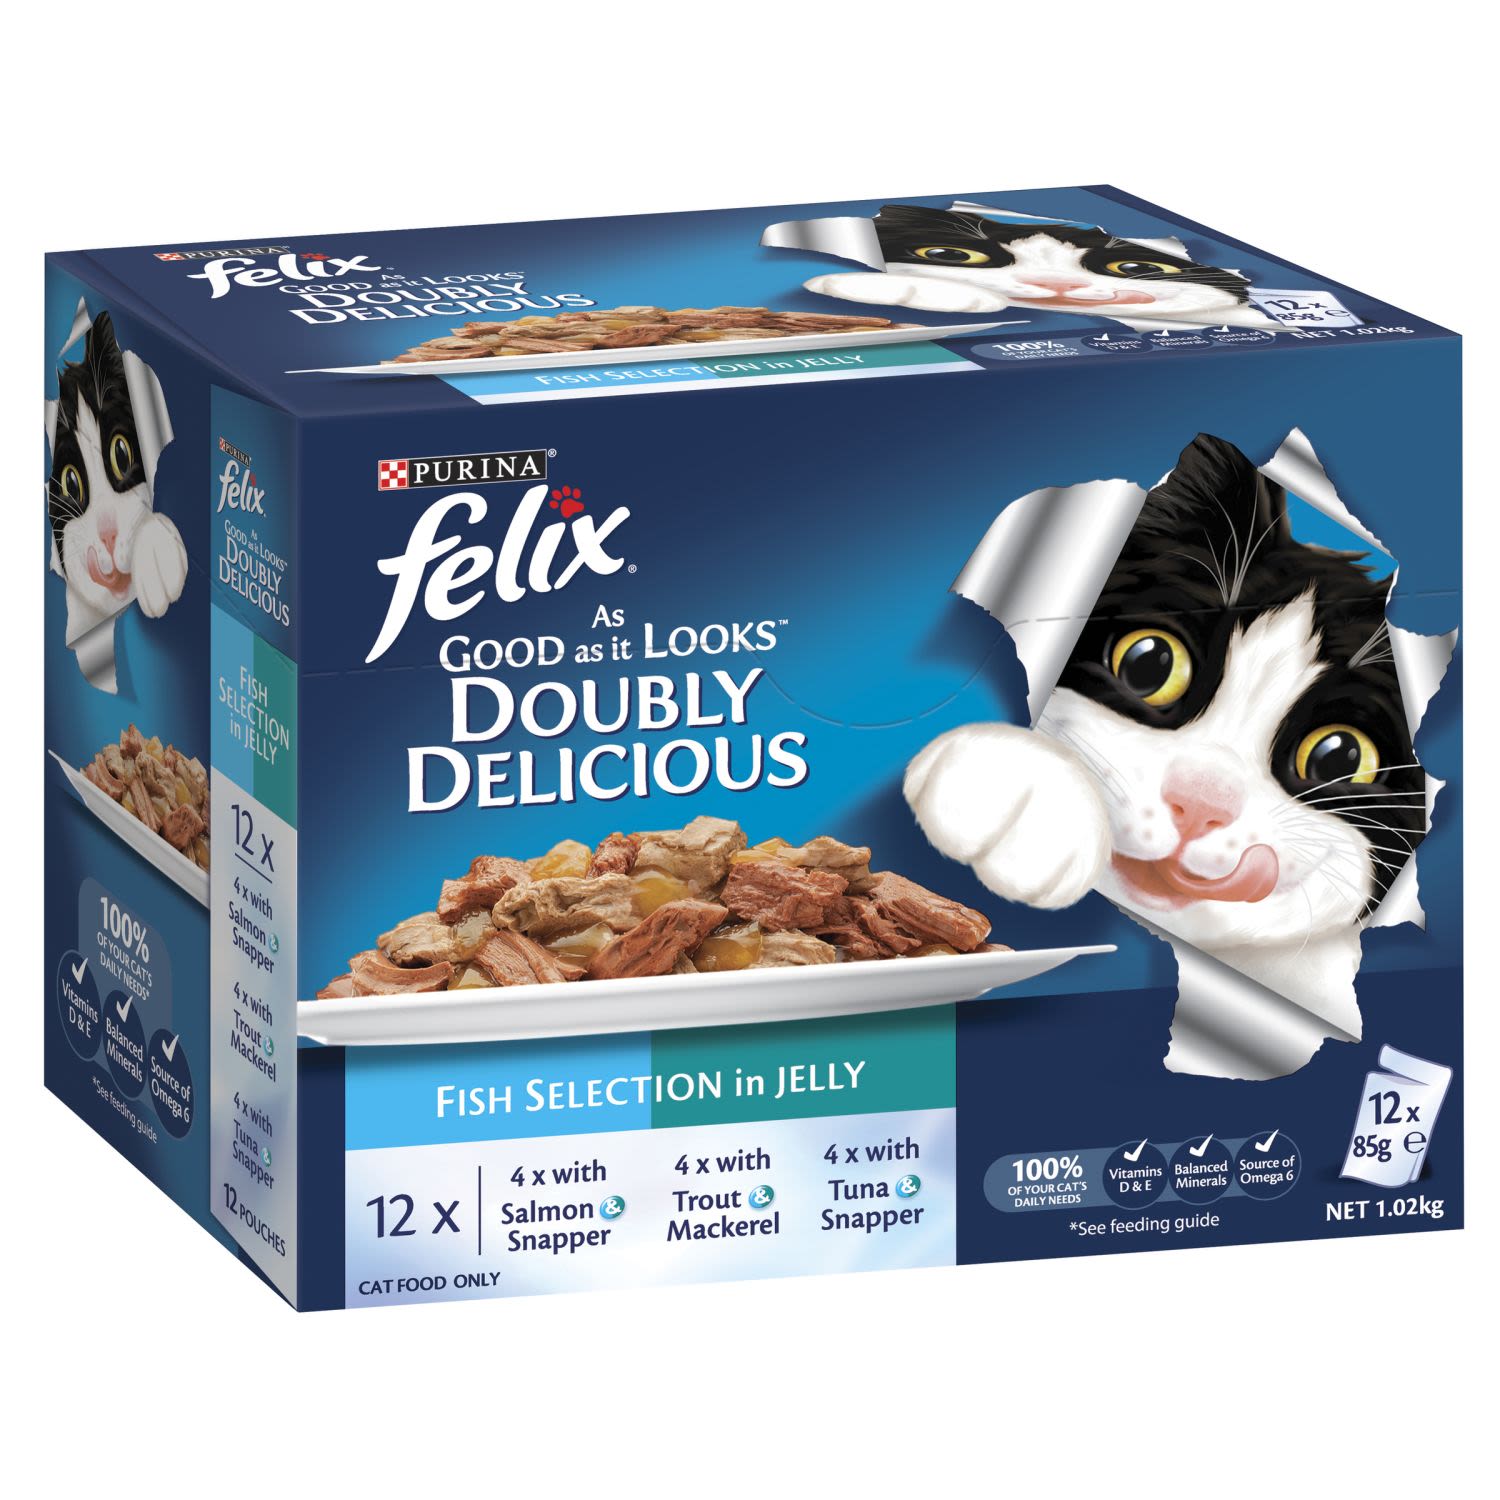 Felix Adult As Good as it Looks Doubly Delicious Fish Selection in Jelly Wet Cat Food, 12 Each